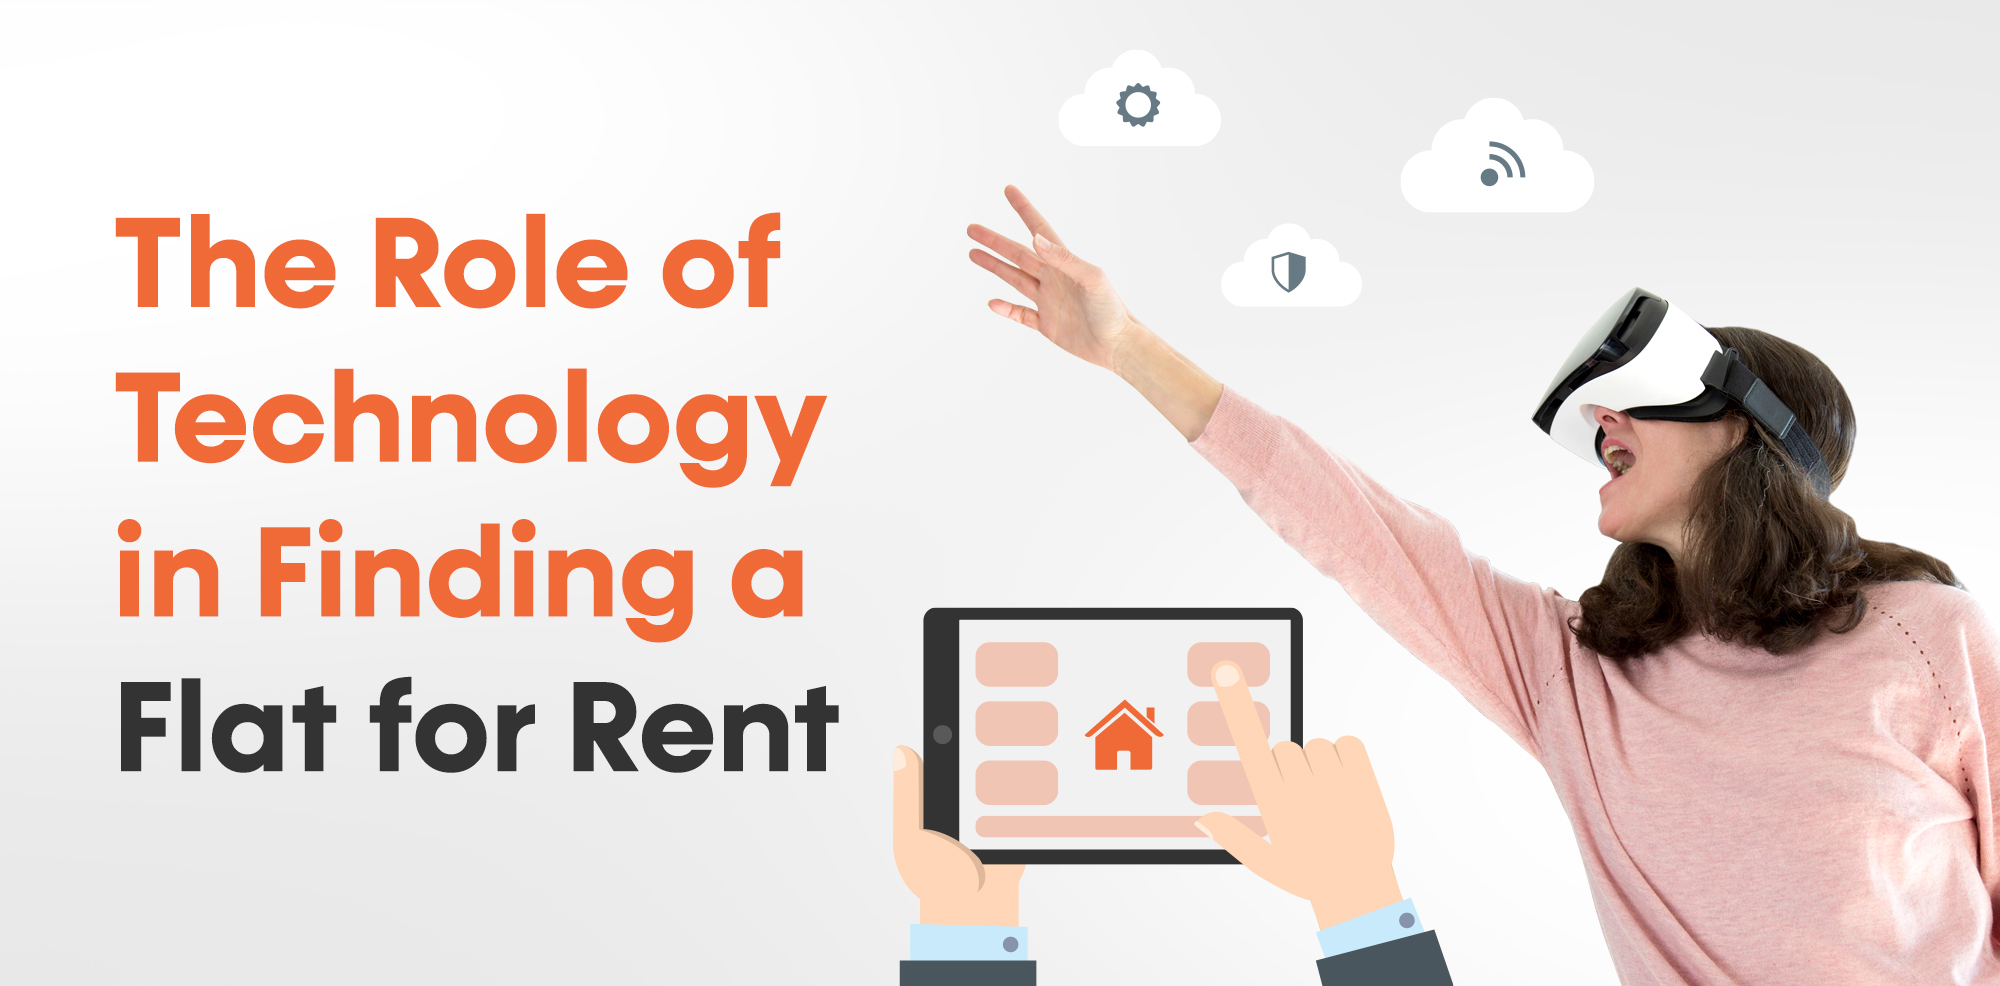 The Role of Technology in Finding a Flat for Rent